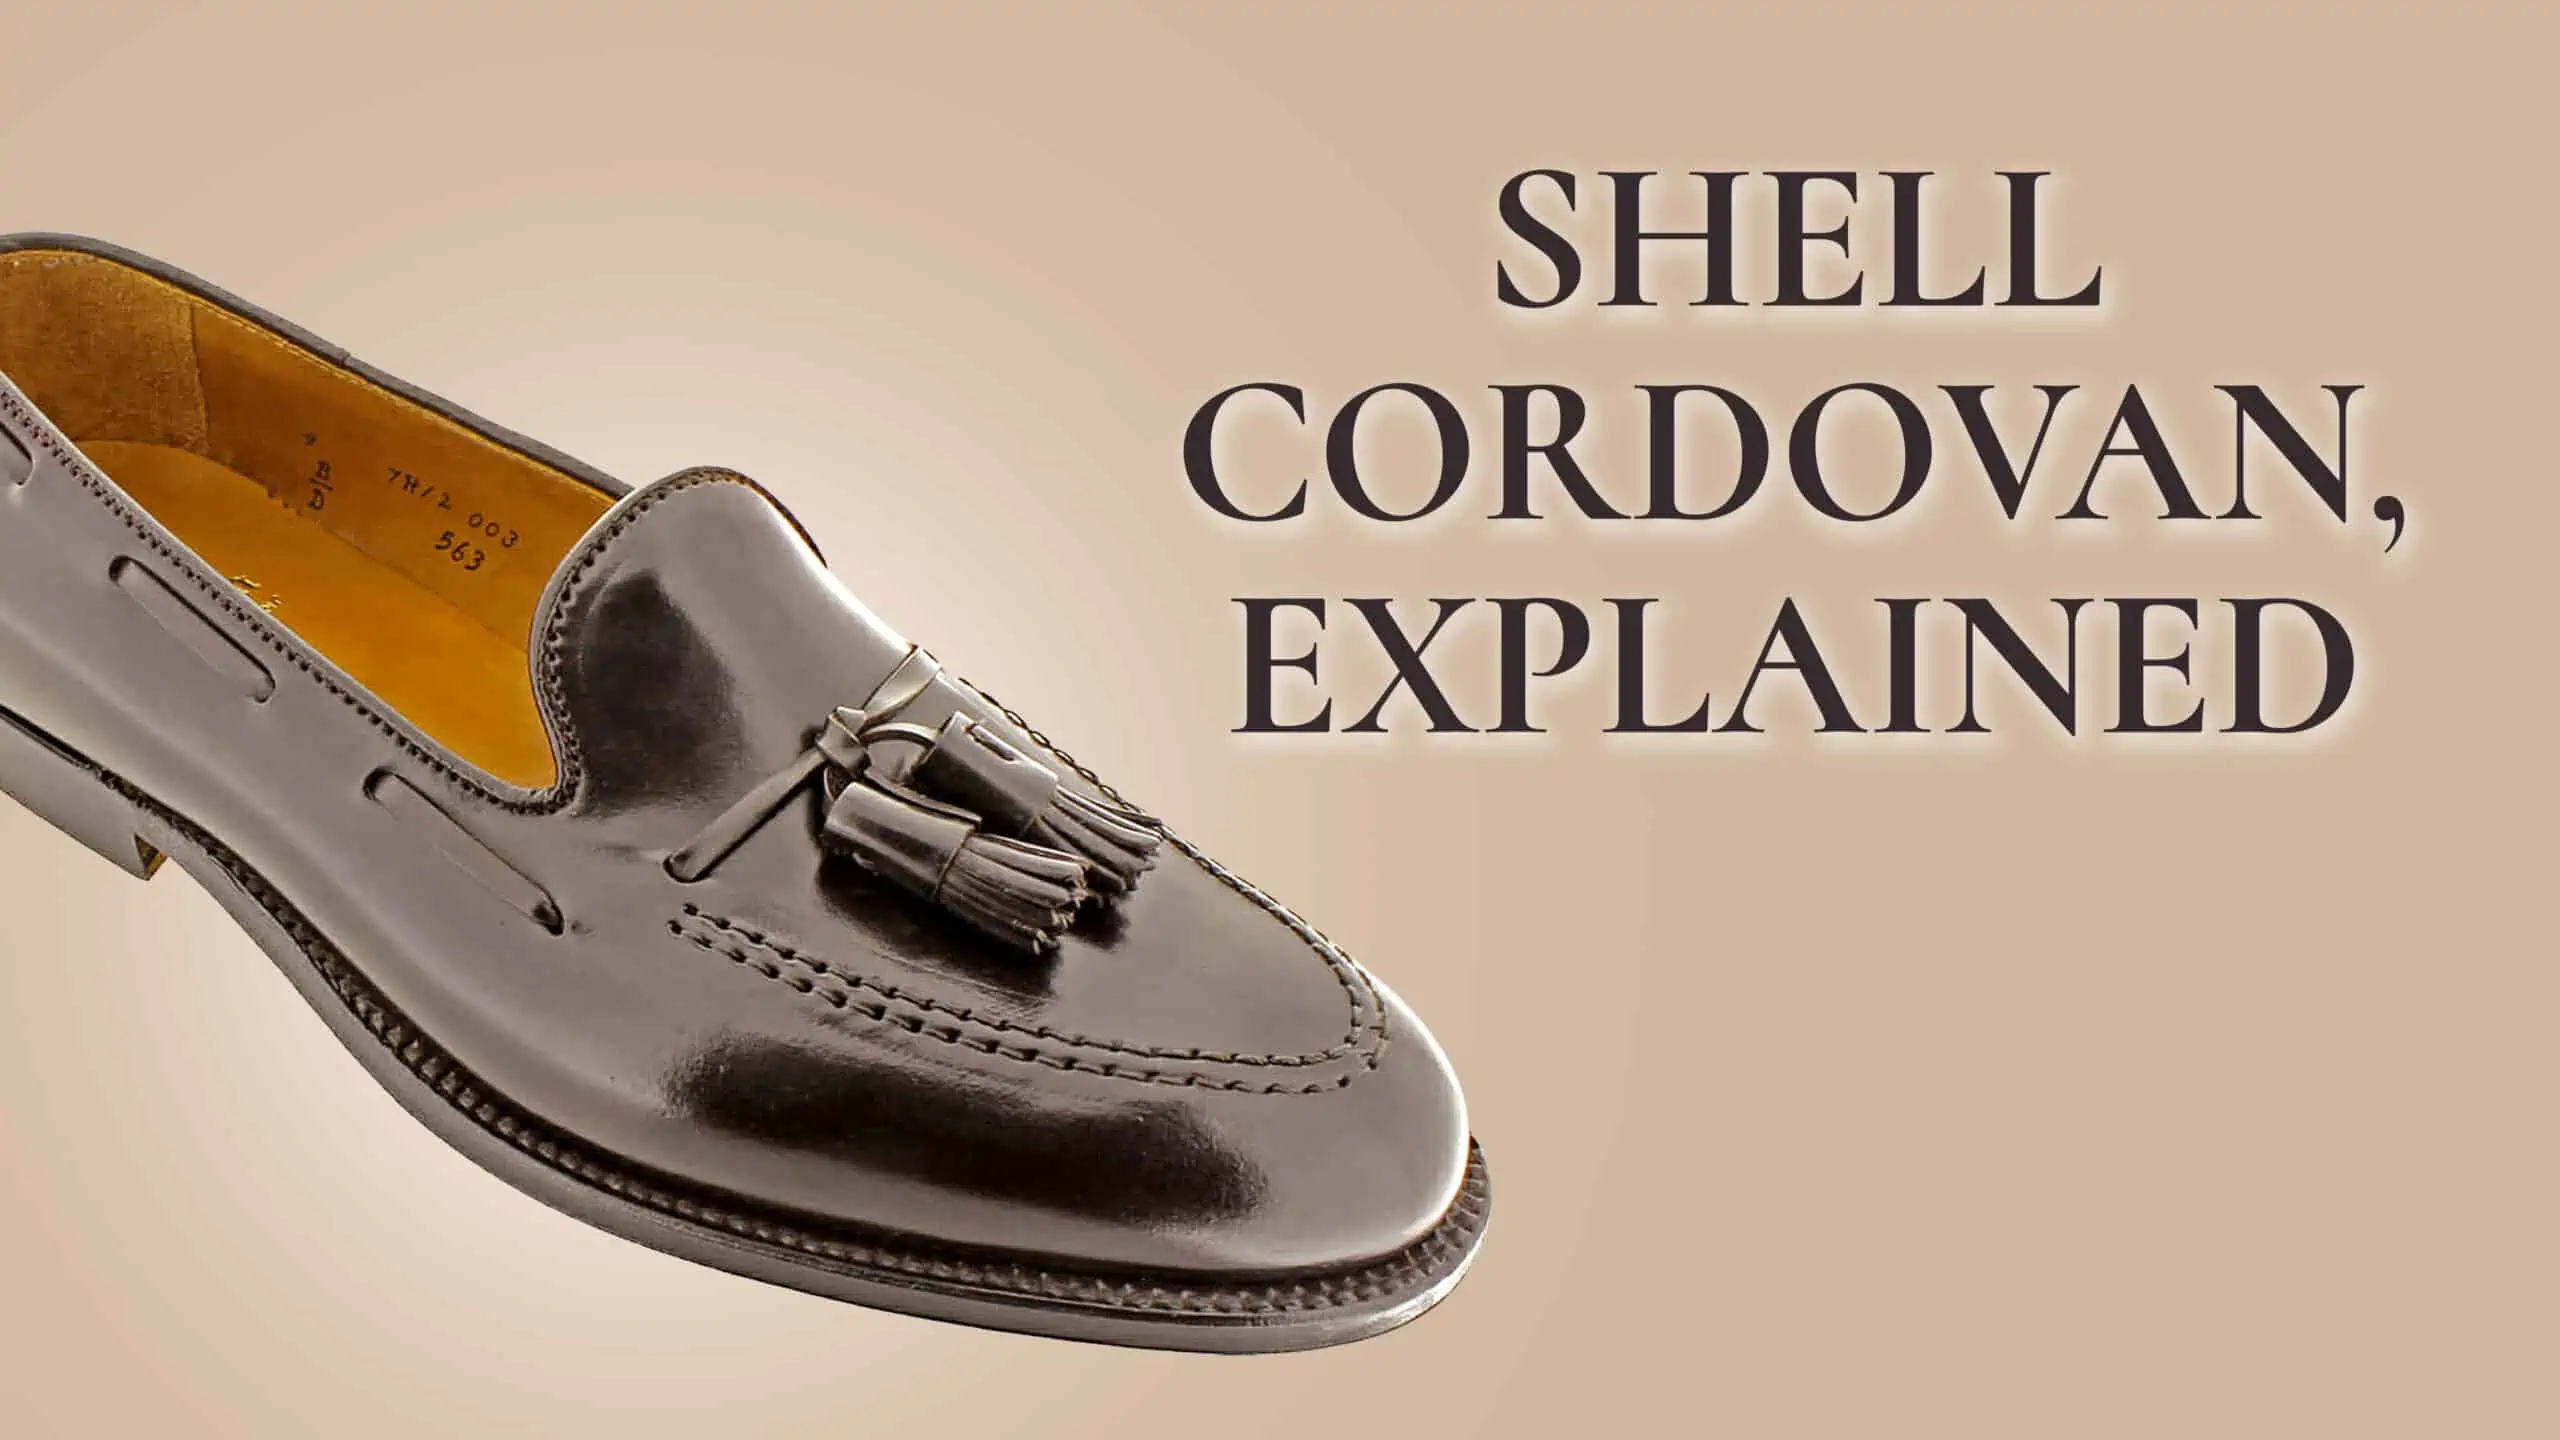 shell cordovan explained 3840x2160 scaled